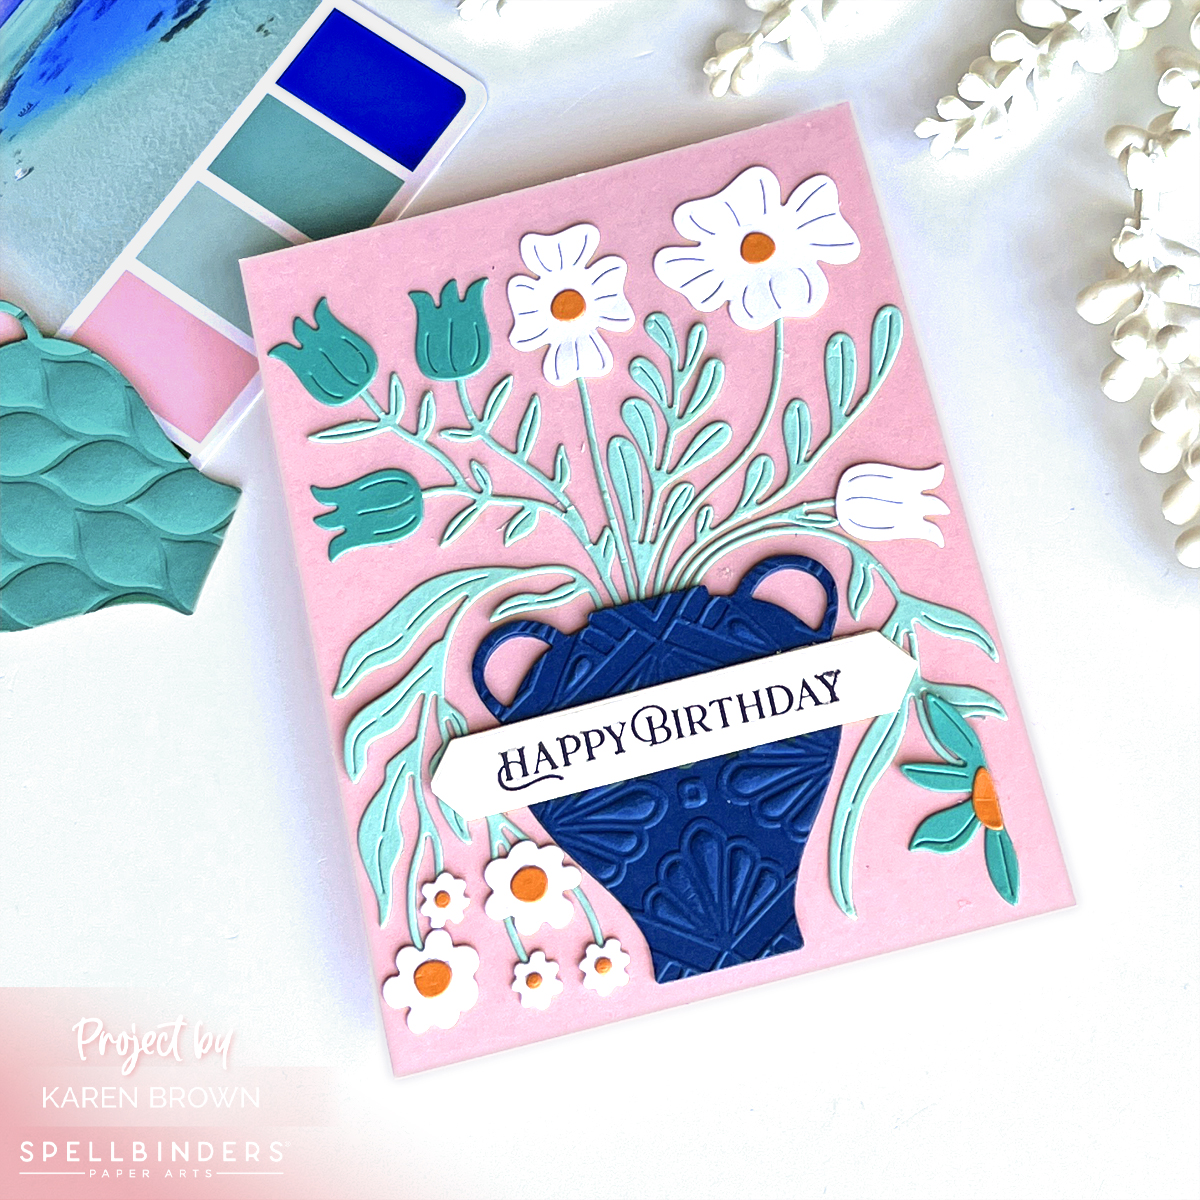 Pink, Aqua, Turquoise, Blue and White Floral die cut Birthday card with flowers in an embossed vase.